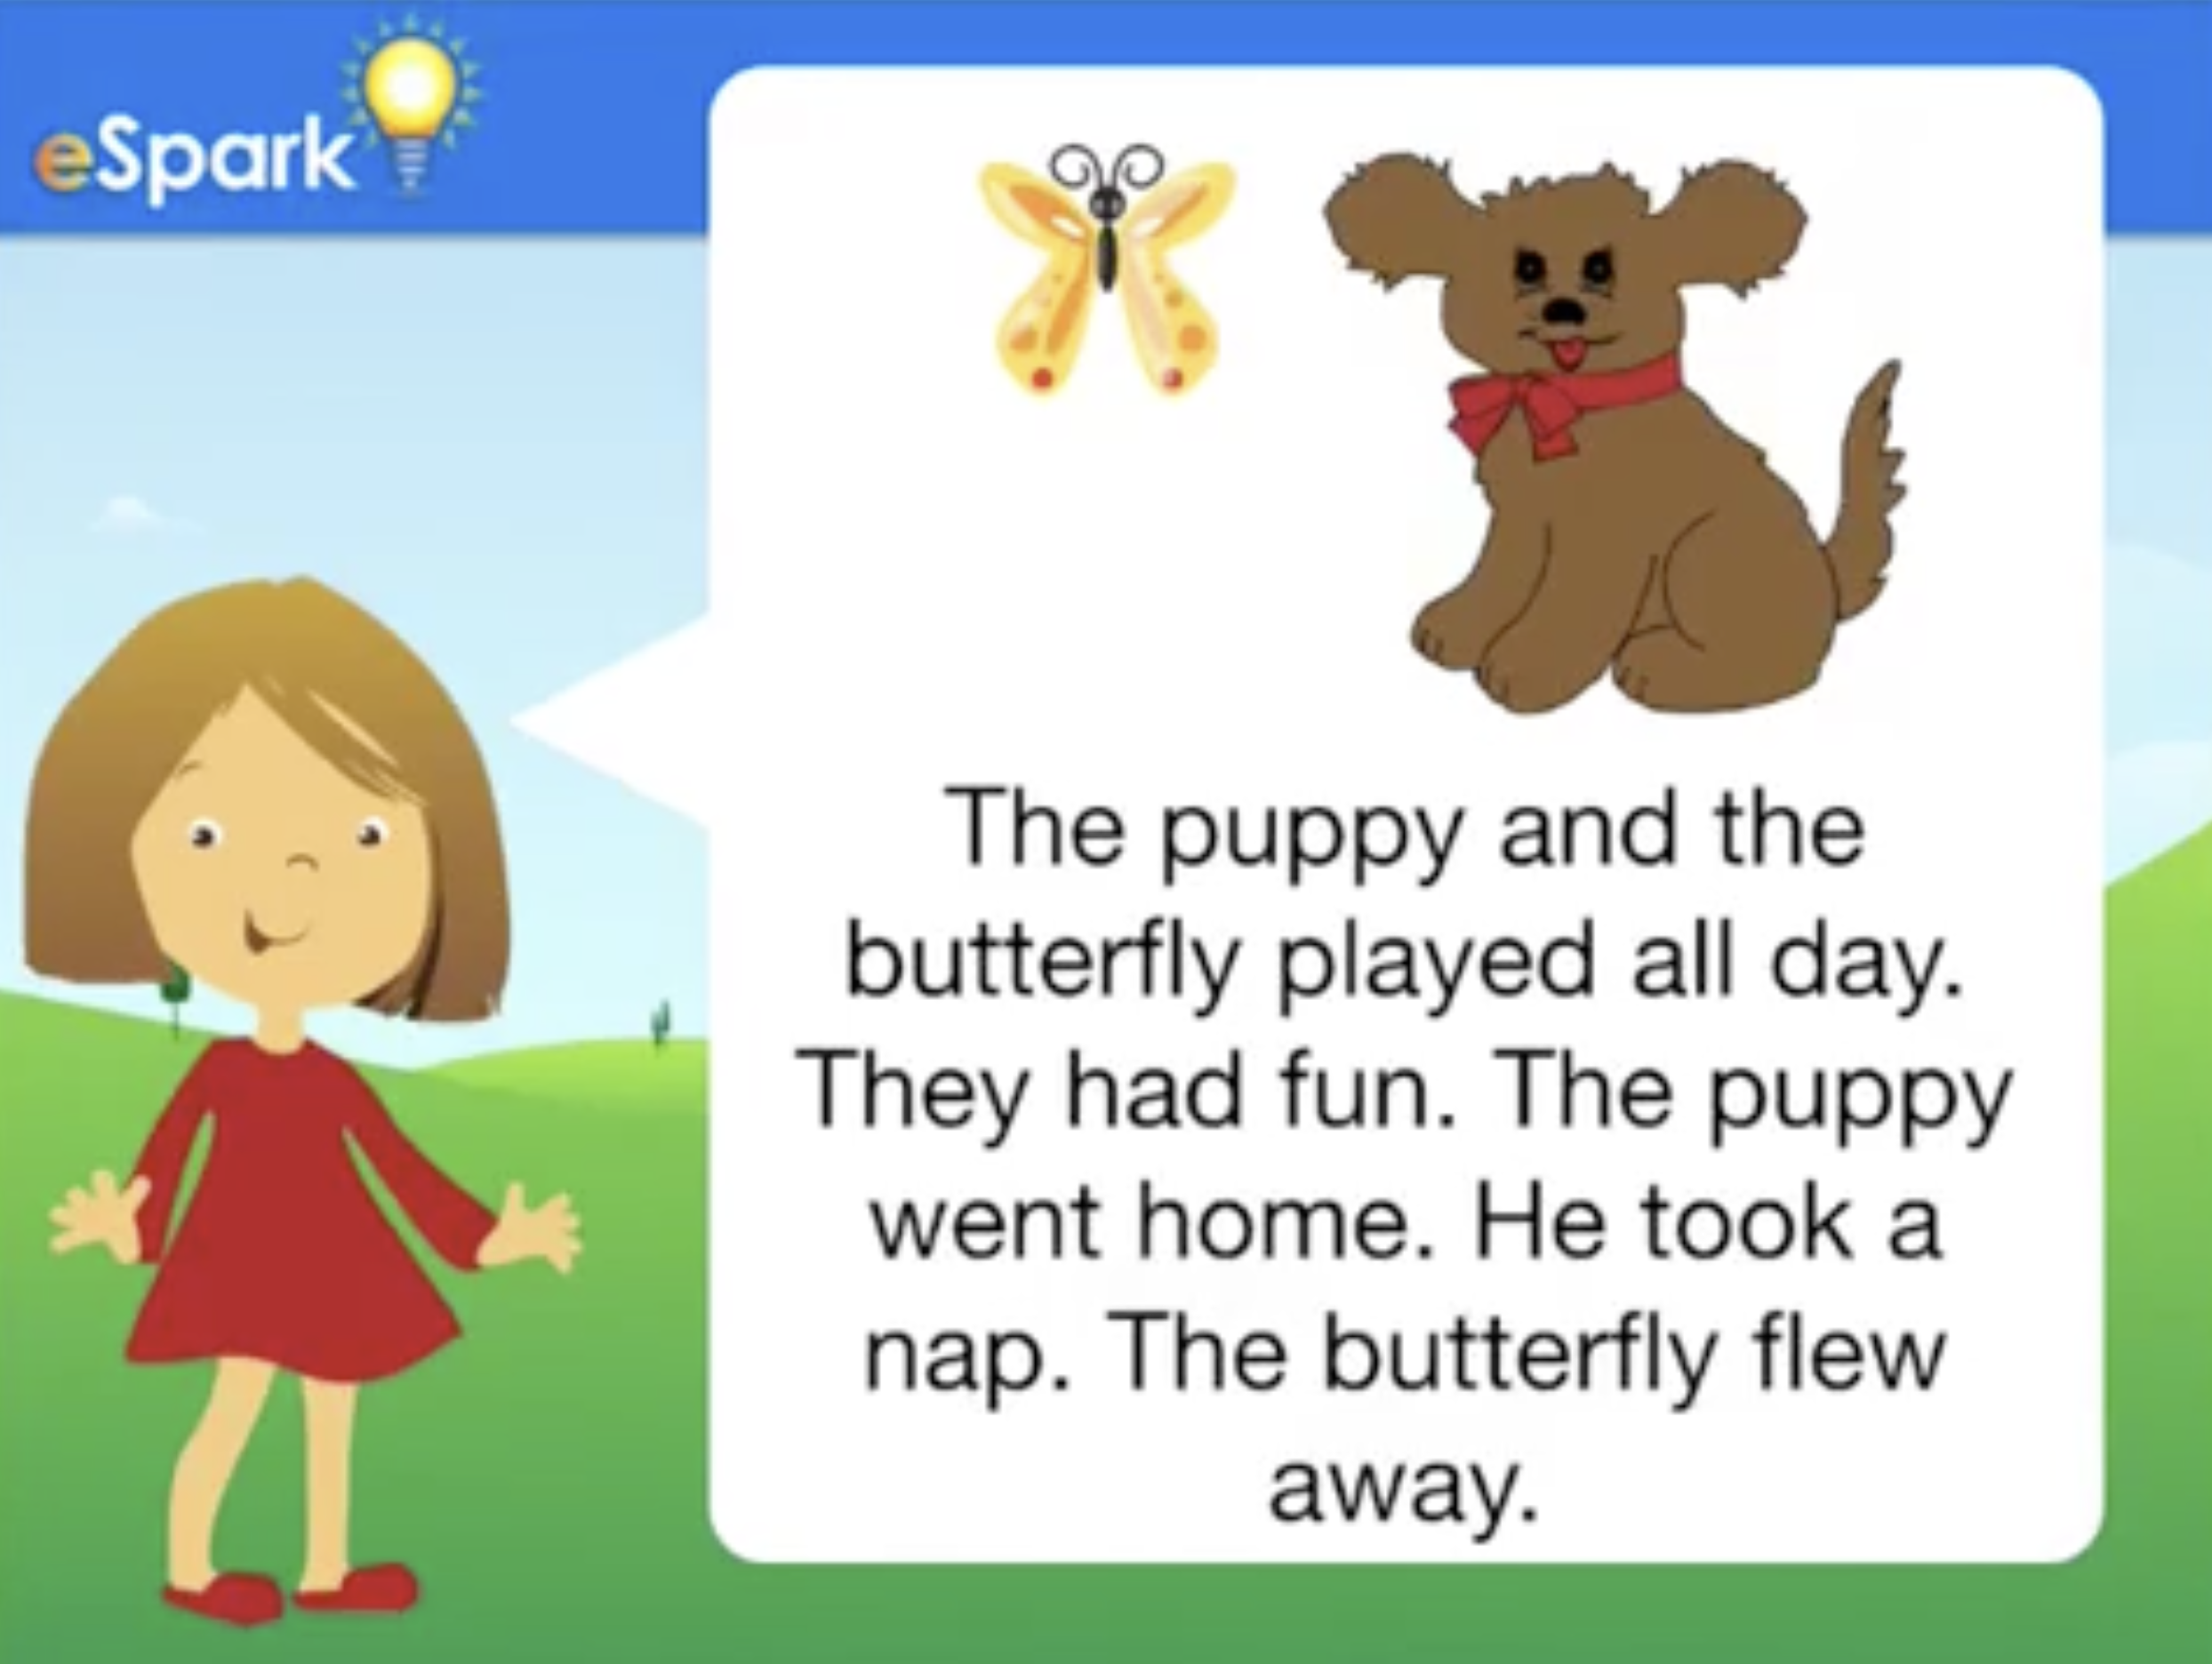 Girl tells story of a puppy and butterfly being friends